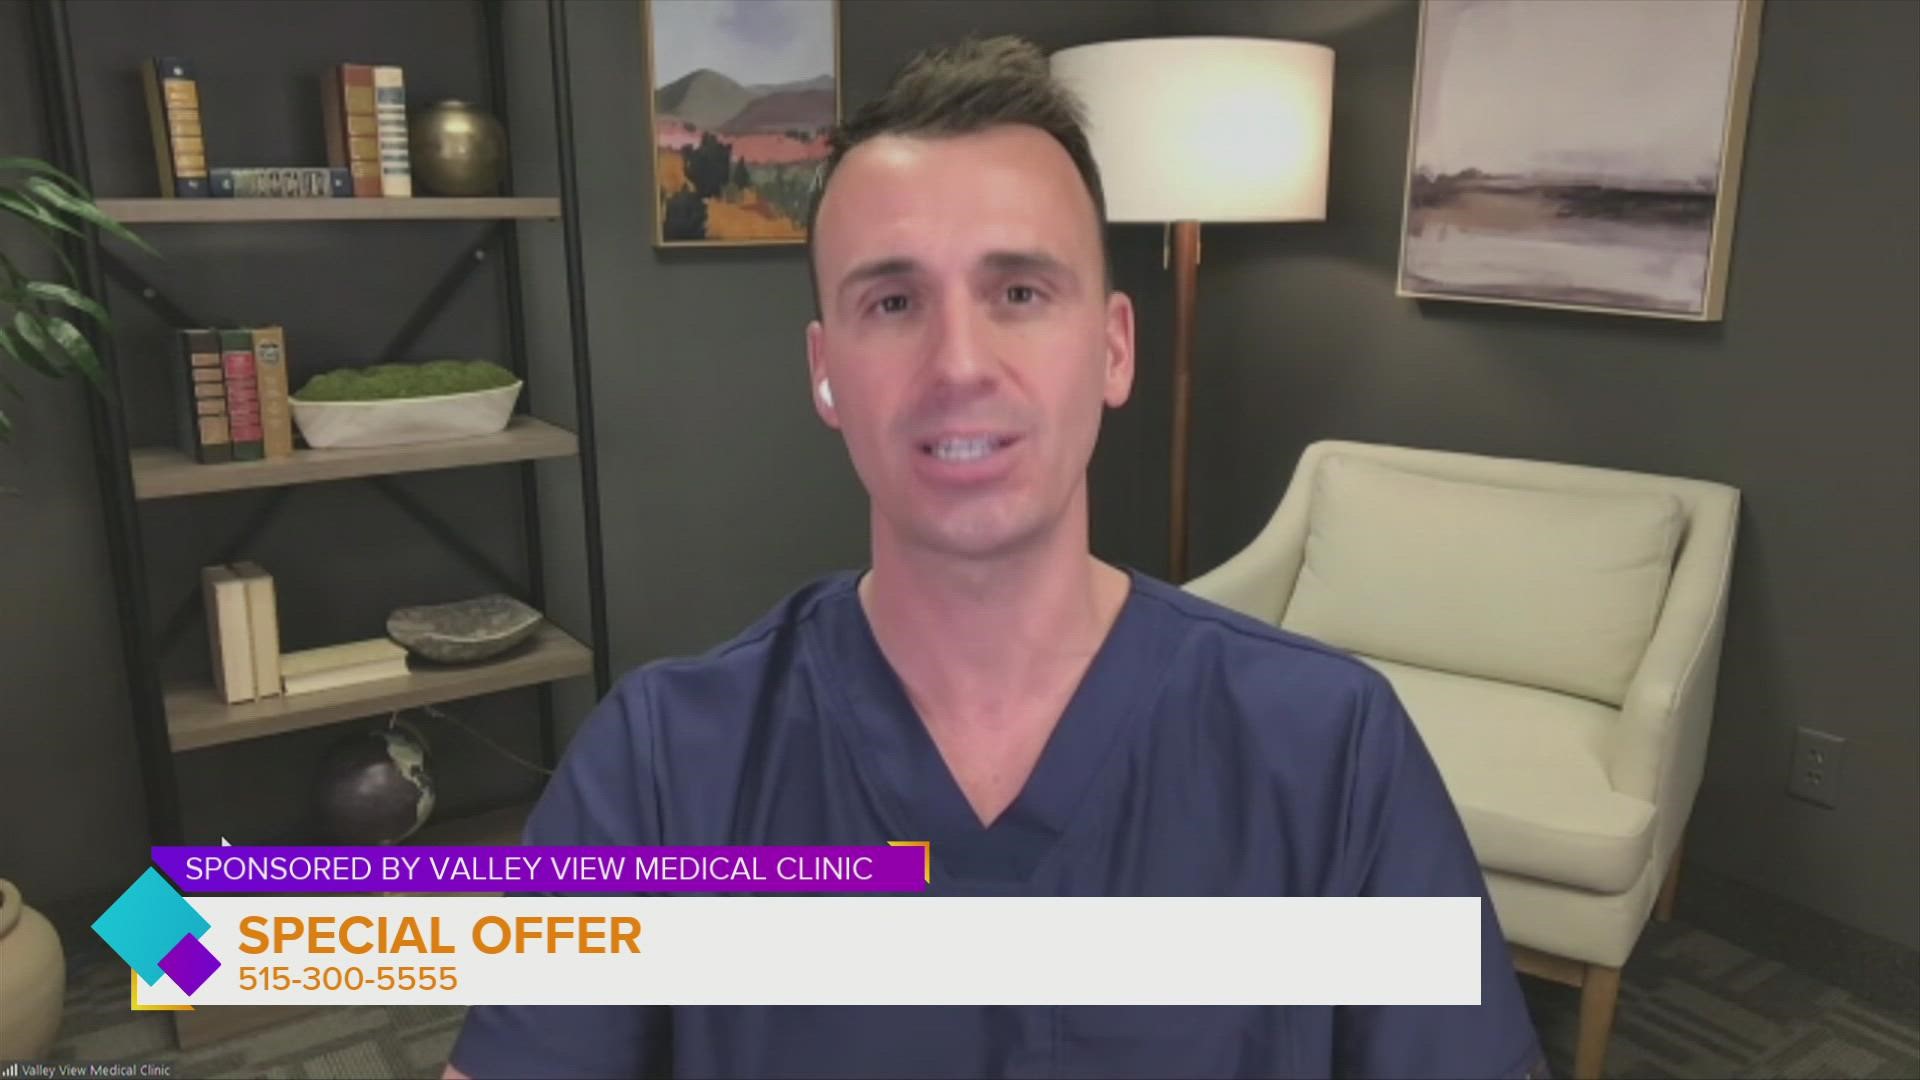 Andrew Rinehart, Medical Technician has details on amazing ED treatment for men and has special offer for those that call 515-300-5555 | Paid Content